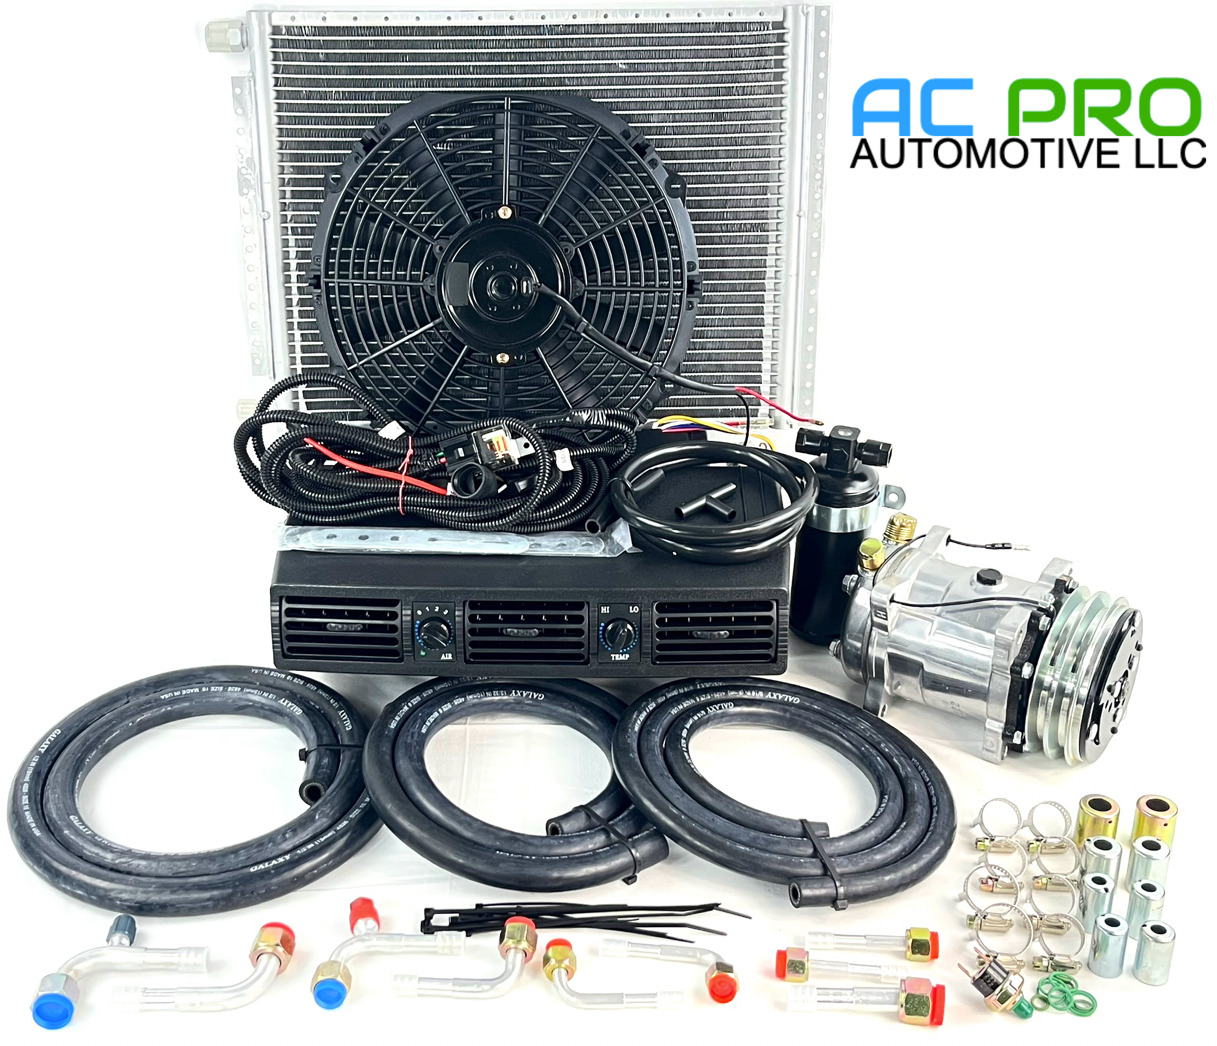 A/C KIT UNIVERSAL UNDER DASH EVAPORATOR 404-100 NEW  HEAT AND COOL ELEC HARNESS